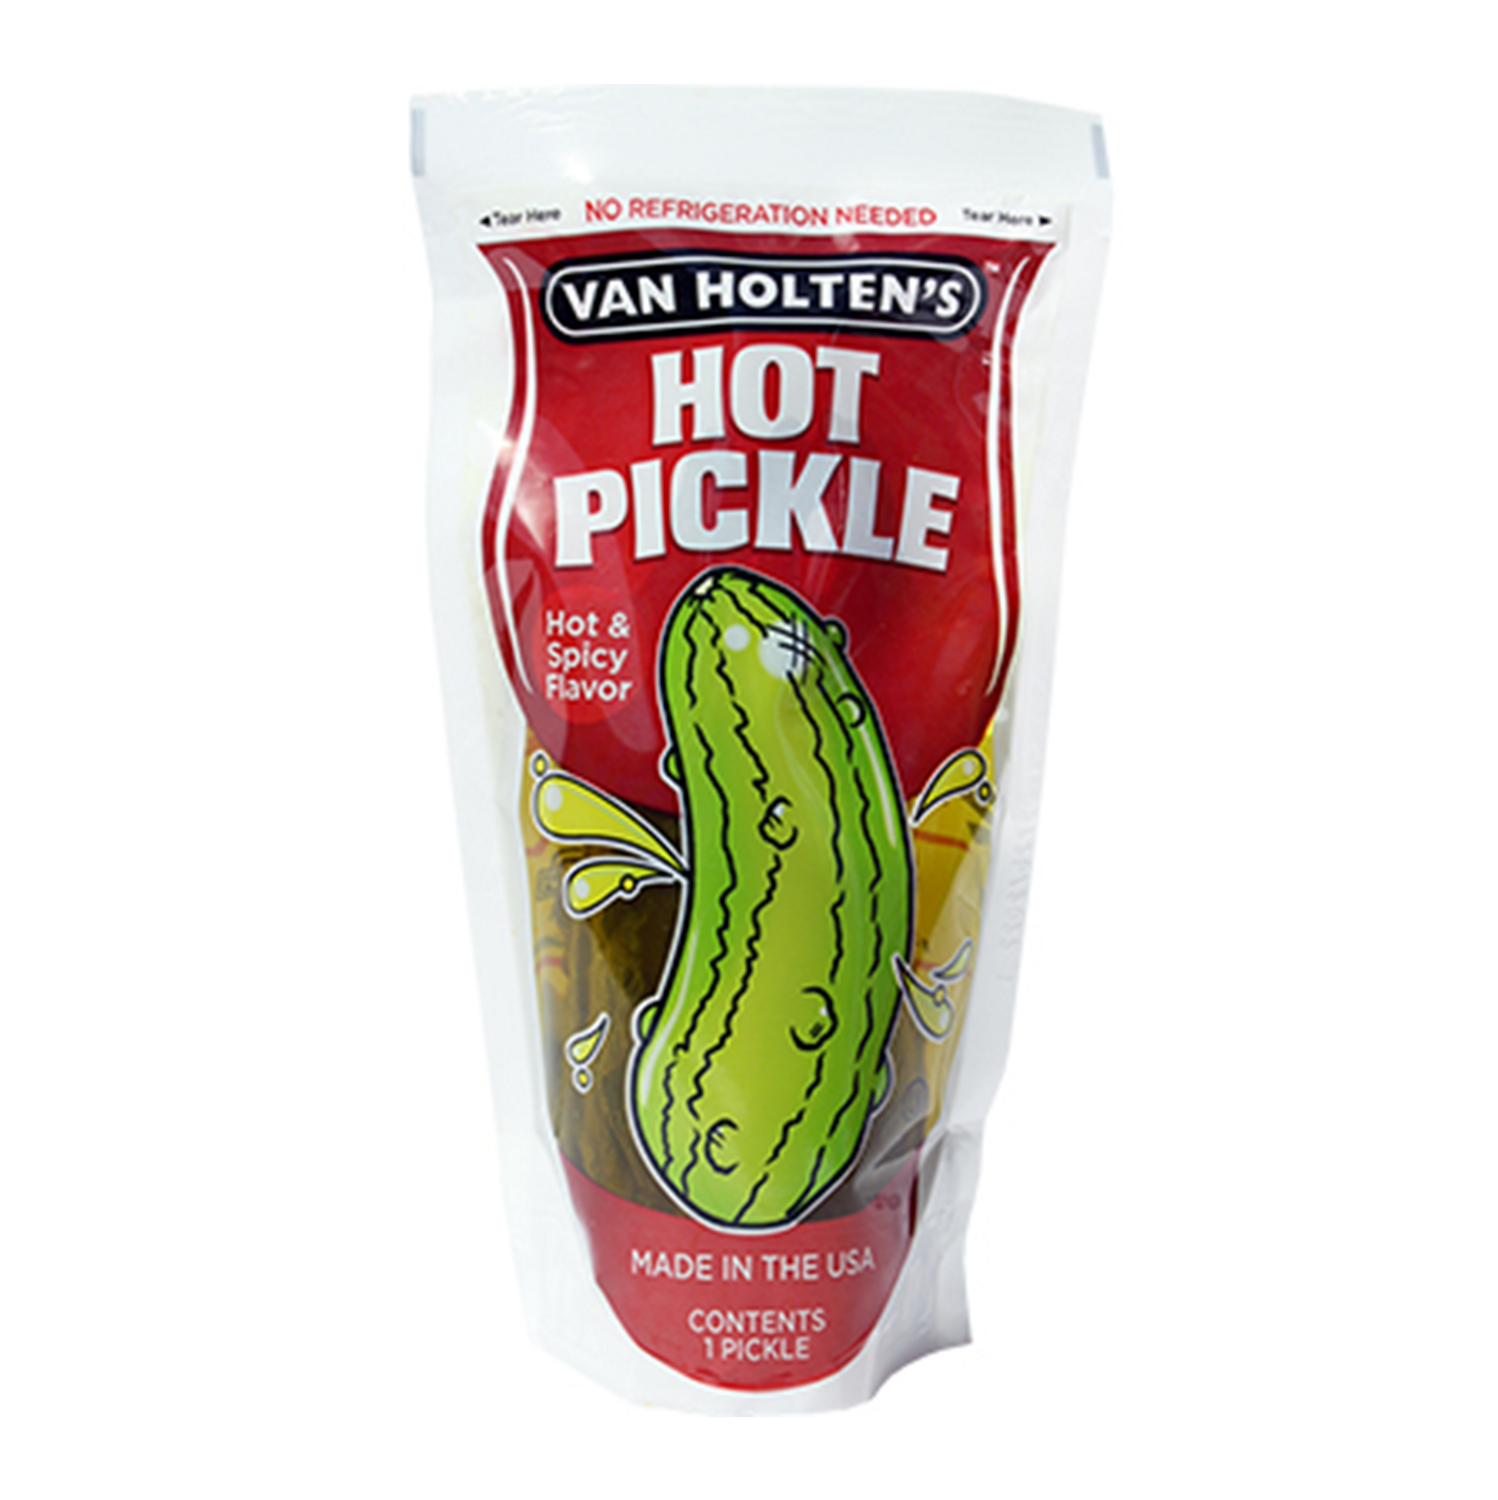 Van Holten's Pickle in a Pouch JUMBO Hot Pickle